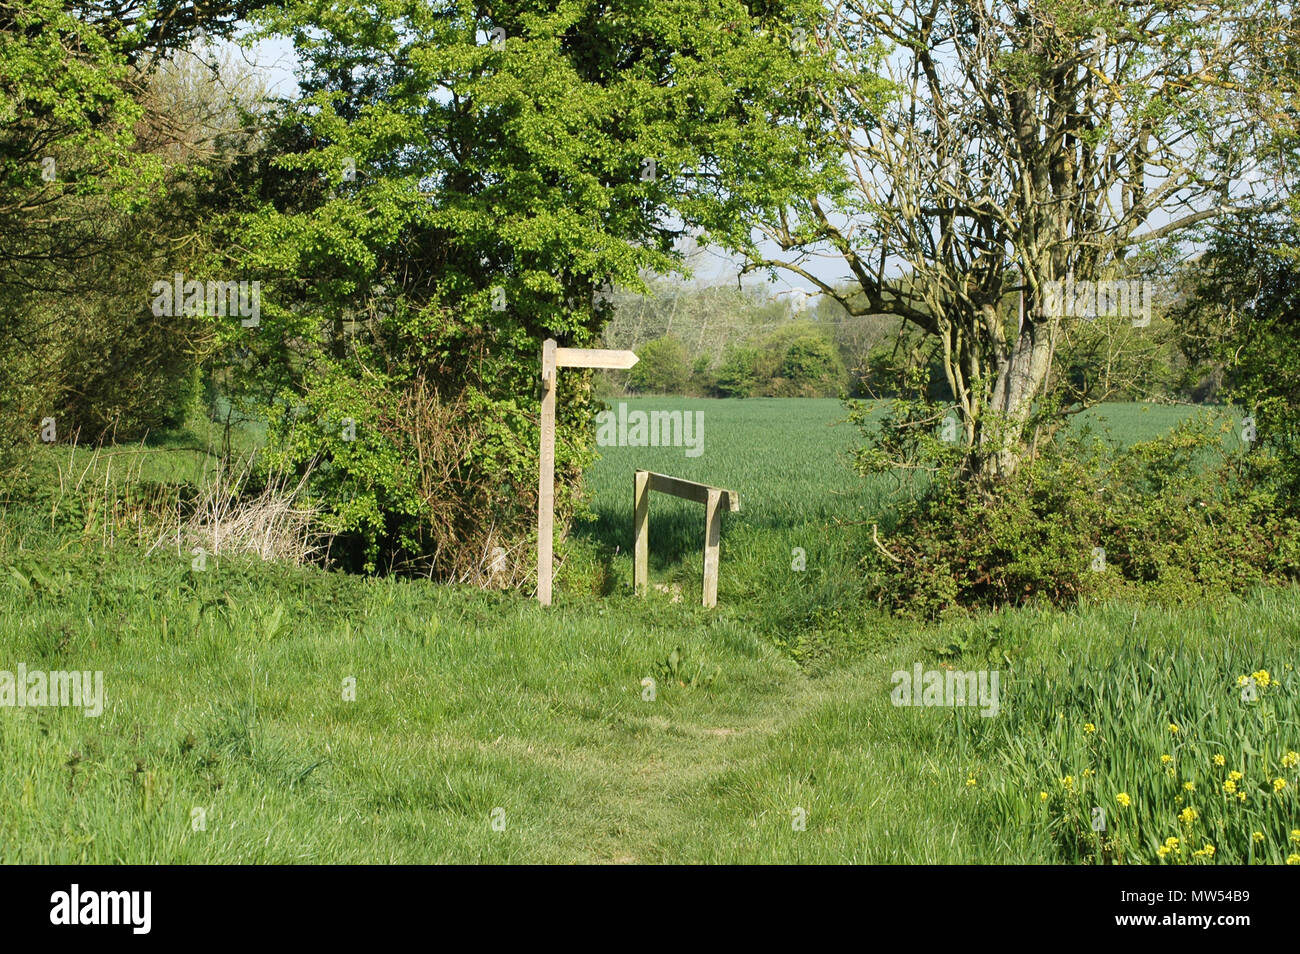 Footpath signpost and bridge at junction of footpaths, Coastal Plain, West Sussex. Stock Photo